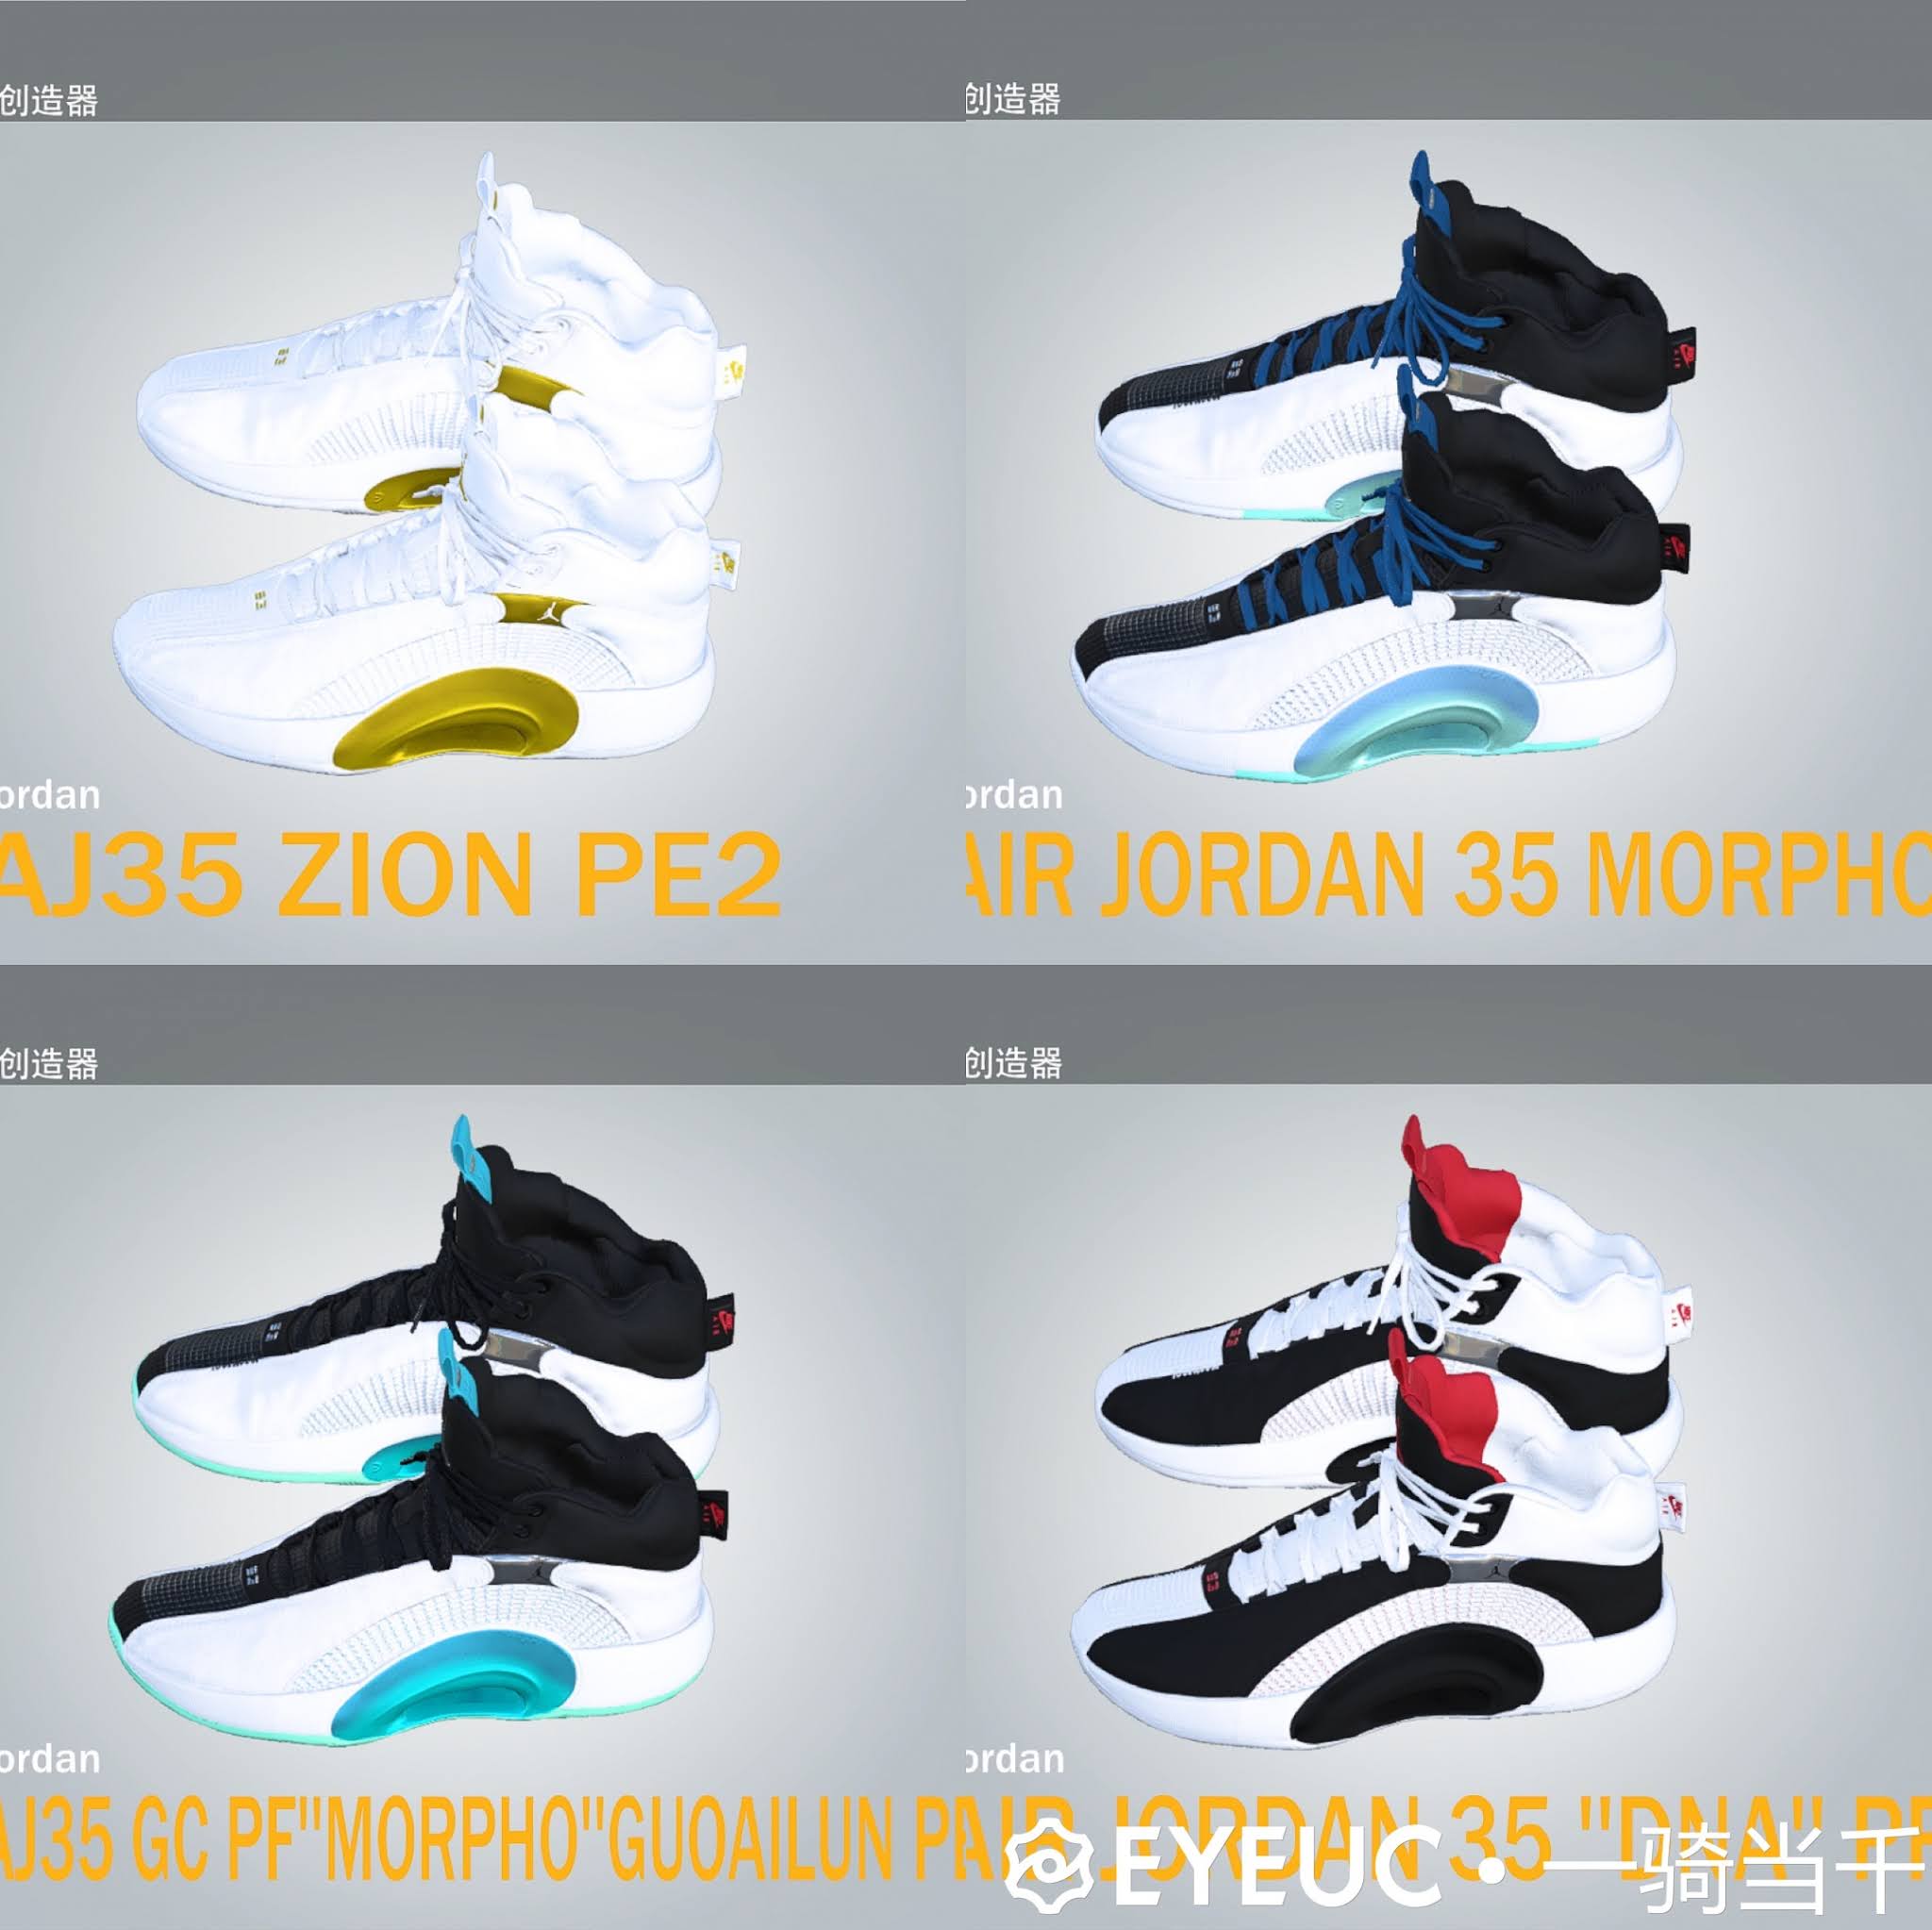 NBA2k21 Sneakers Color Matching sharing V1.6 by One Ride